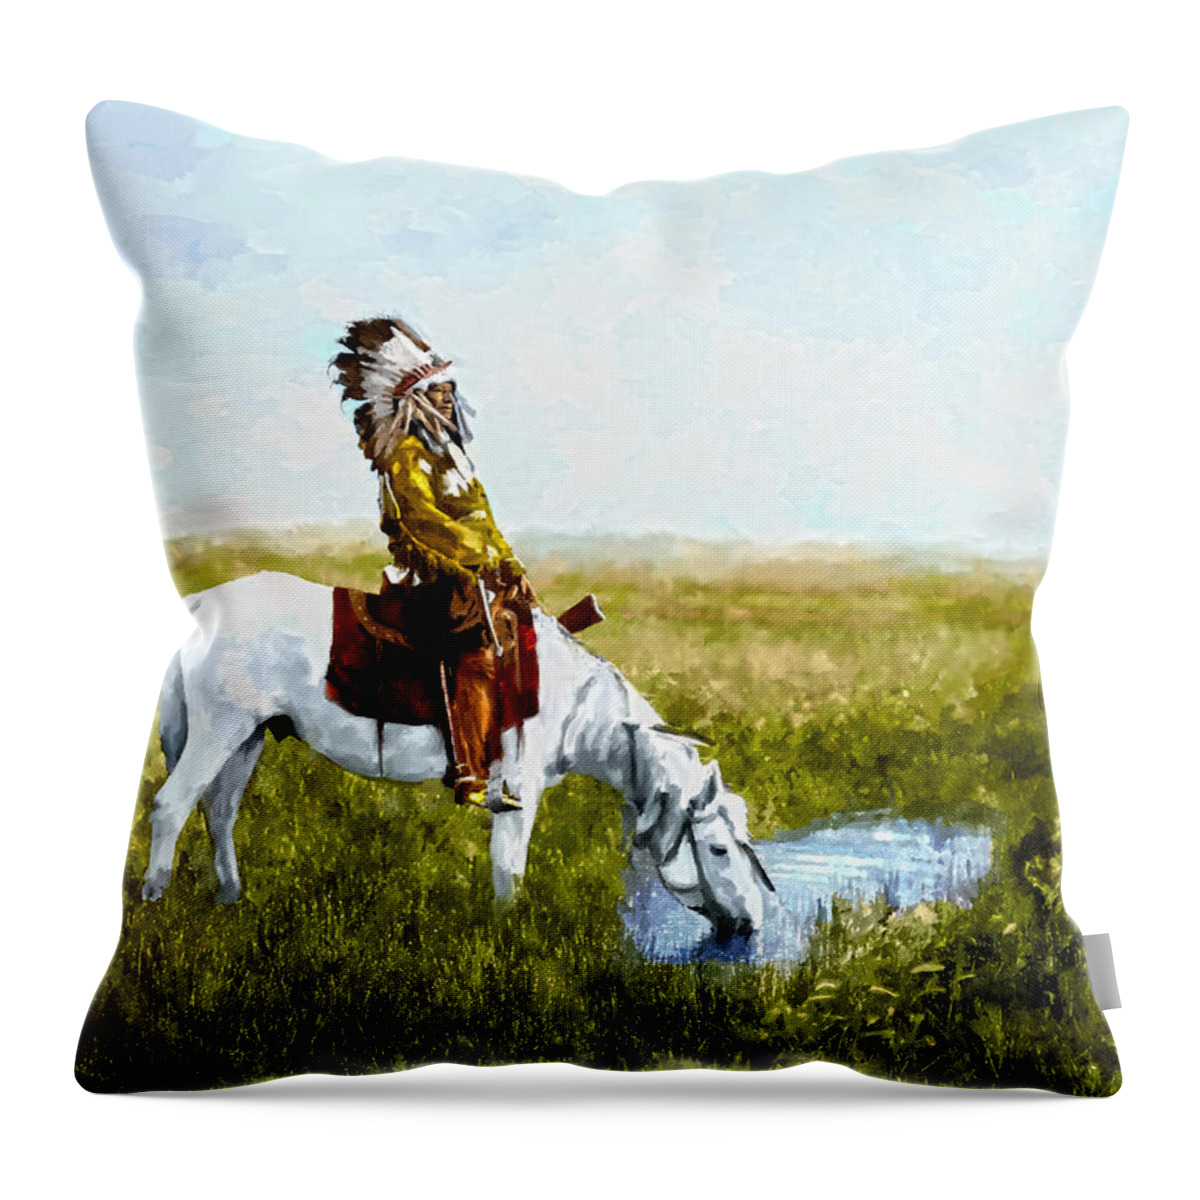 Badlands Throw Pillow featuring the digital art An Oasis in the Badlands by Rick Mosher